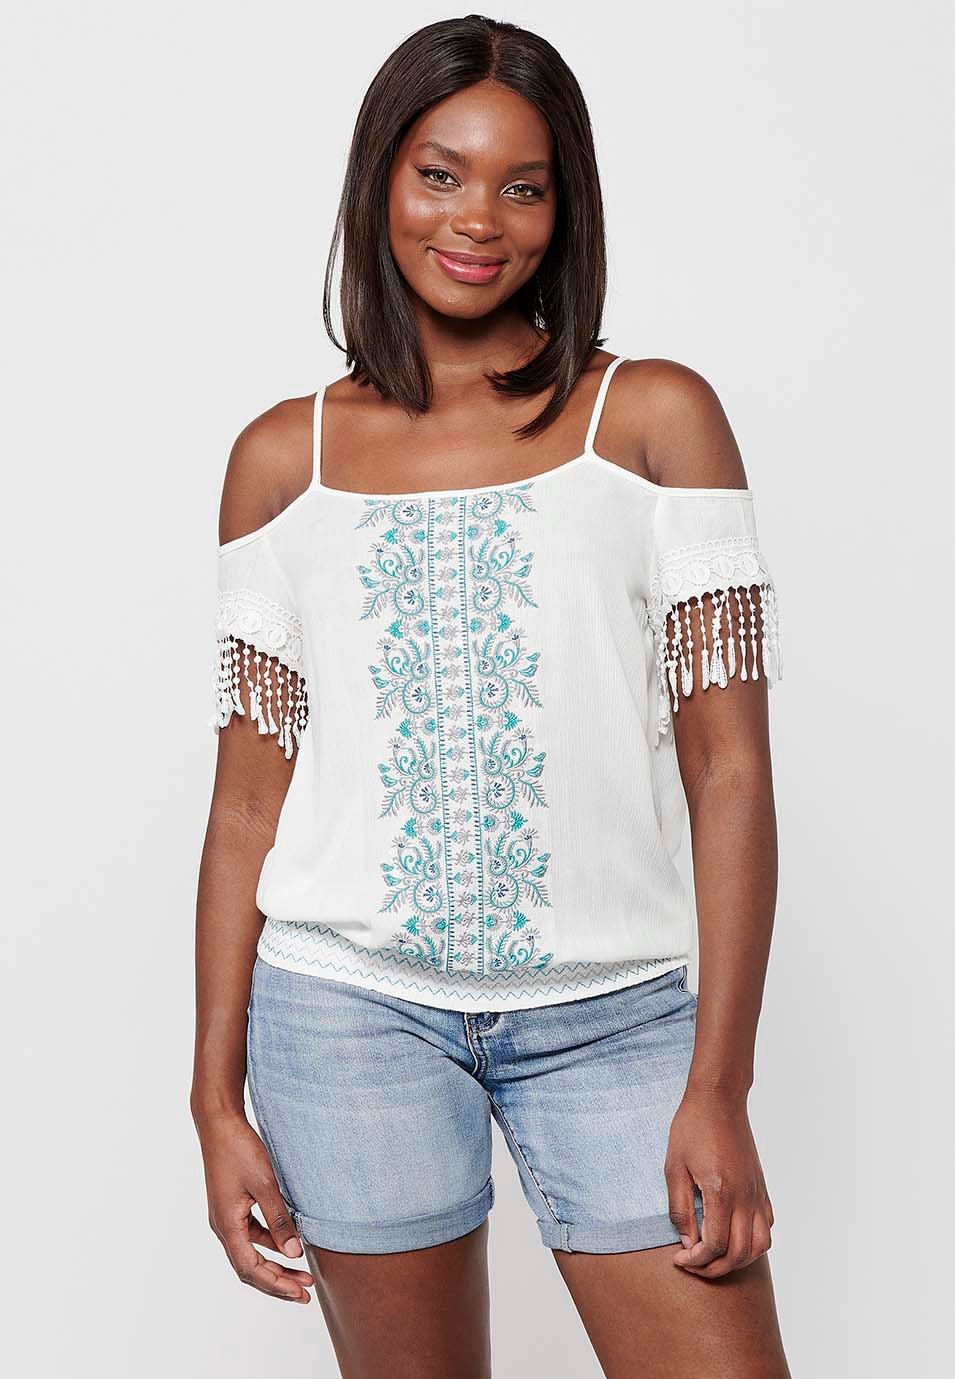 White Tank Top with Floral Embroidered Details and Round Neckline with Rubberized Low Waist for Women